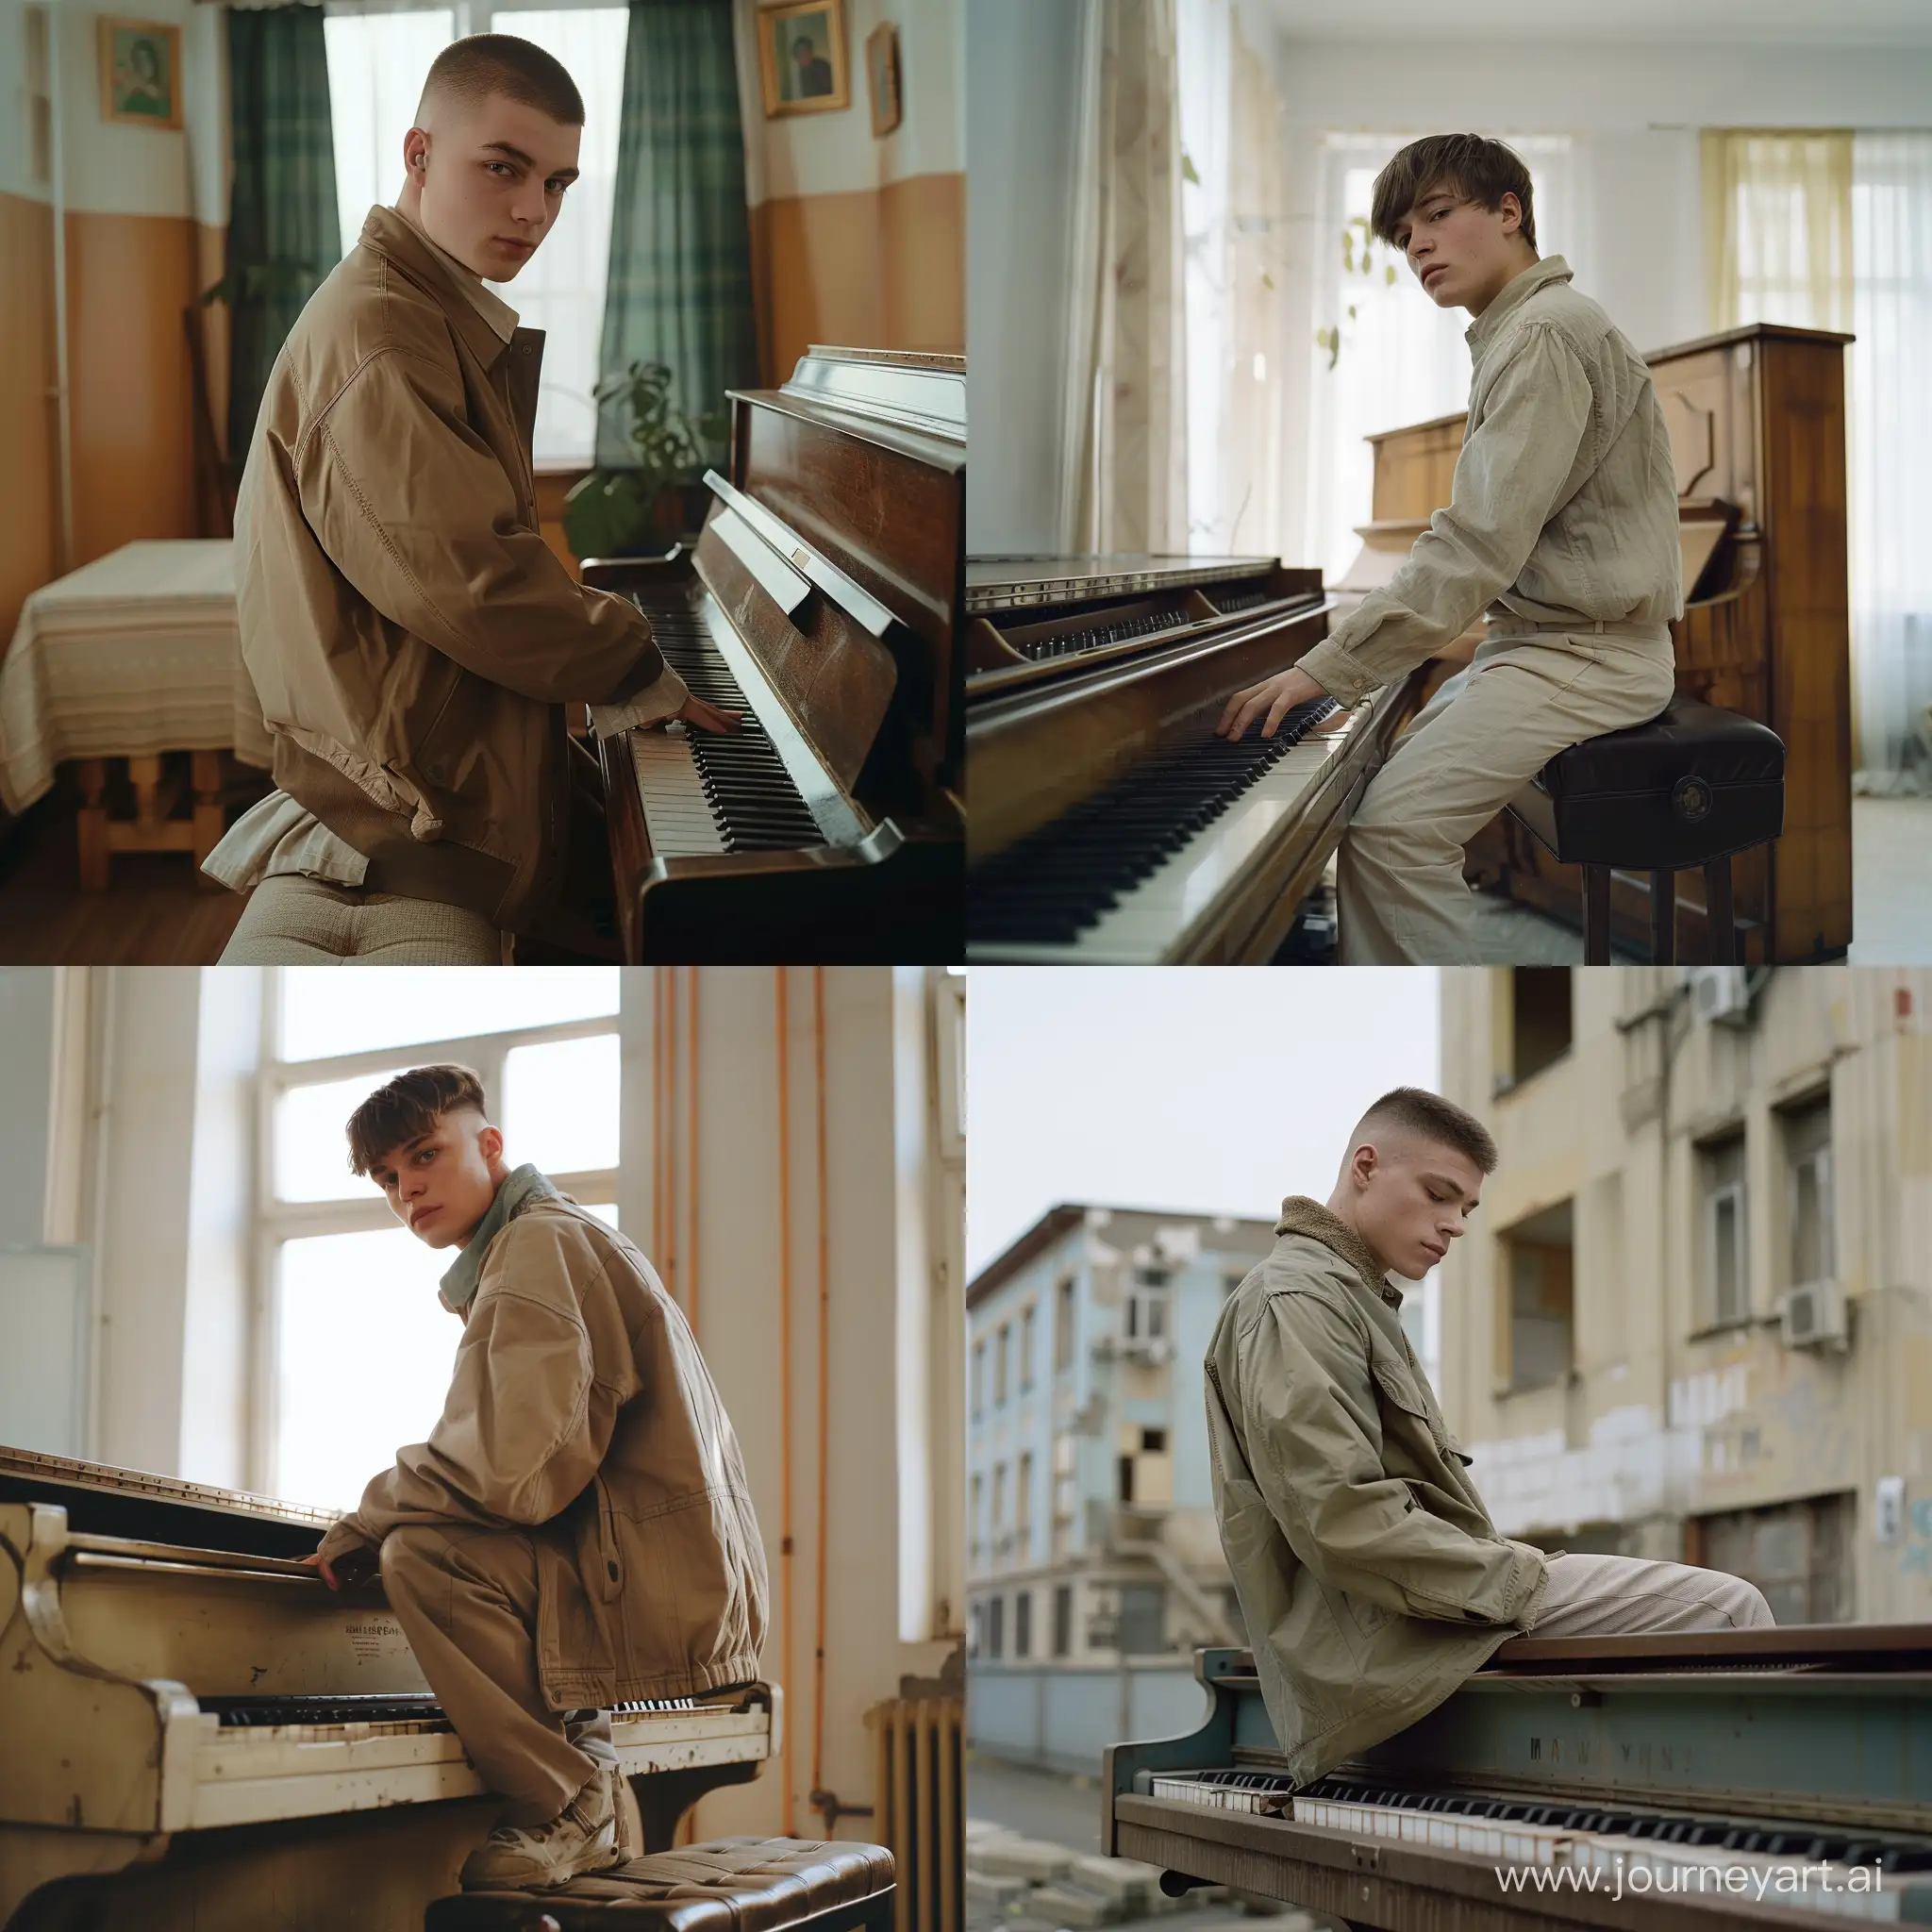 Young-Adult-Pianist-in-Stylish-Attire-Sitting-atop-a-Grand-Piano-in-Cinematic-35mm-Style